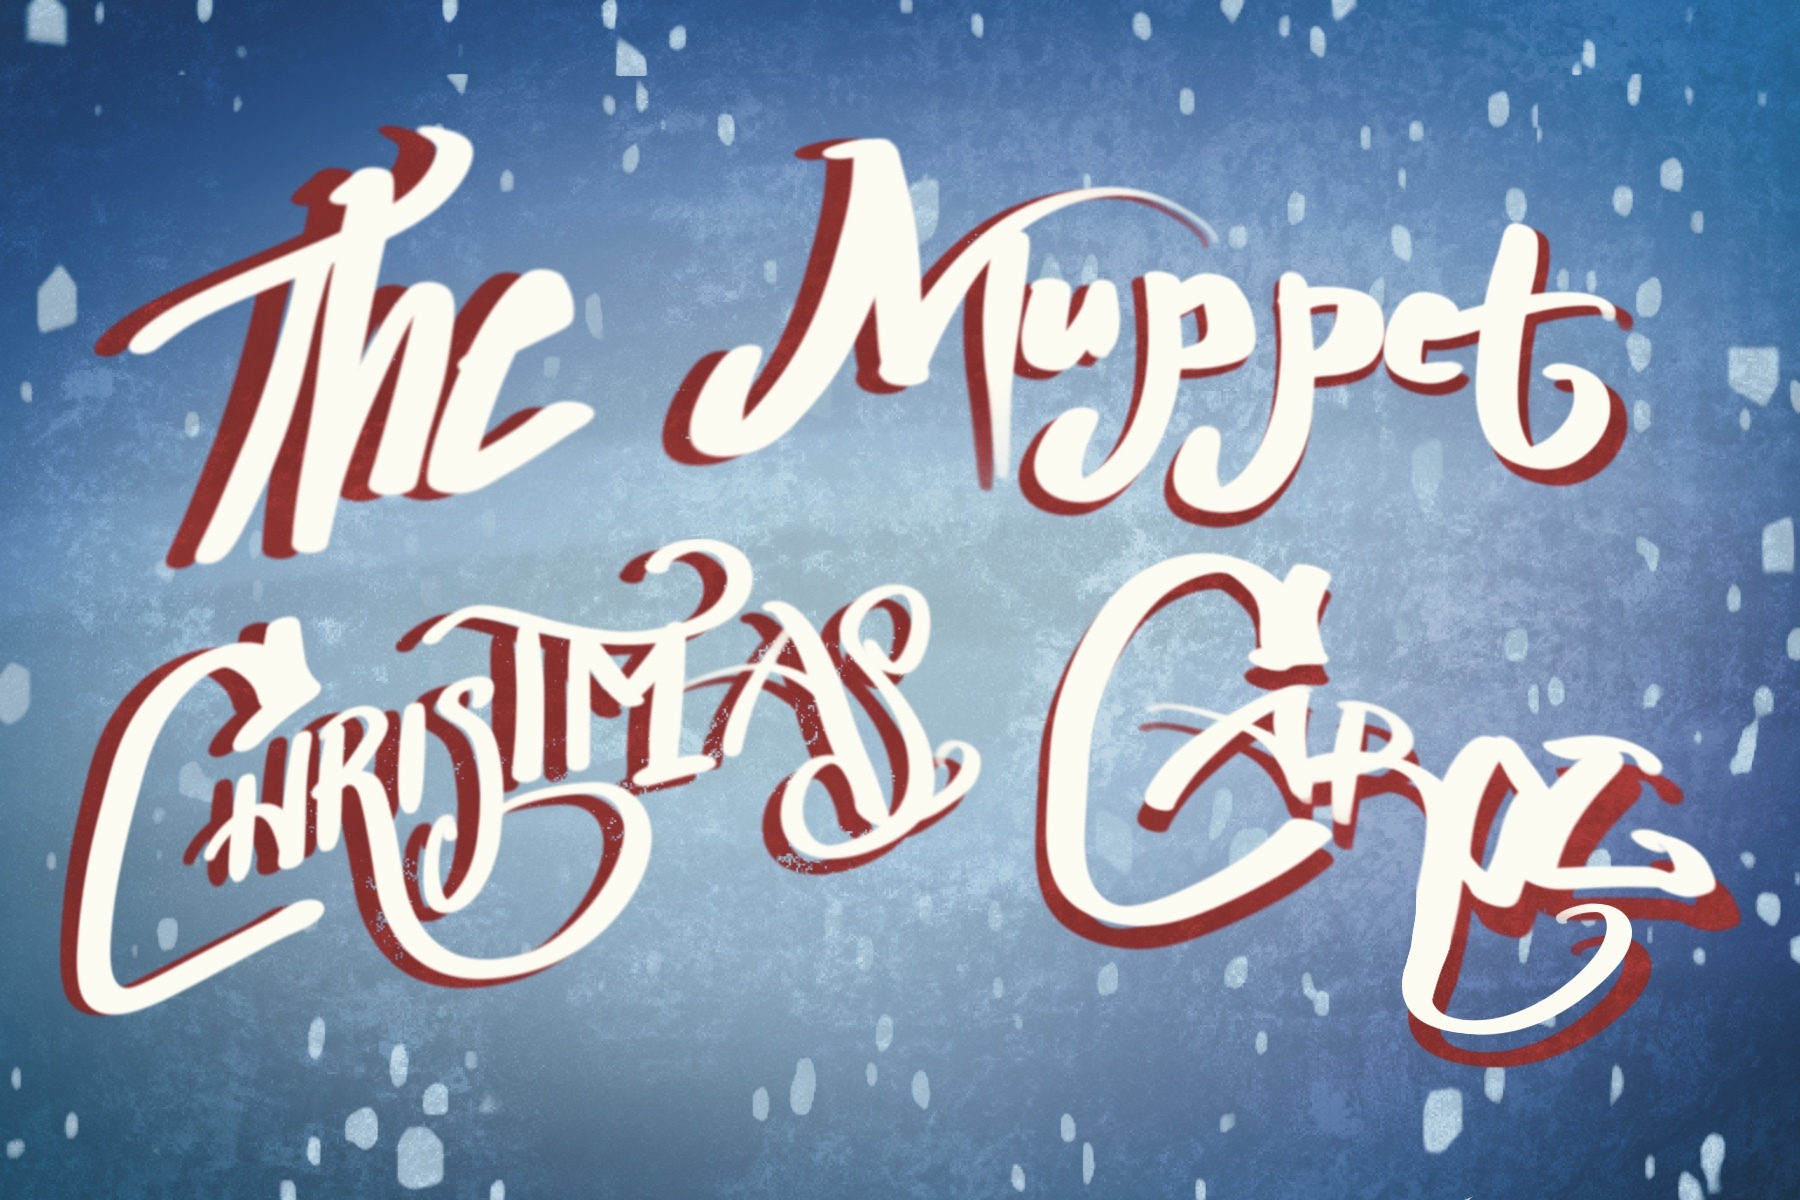 The words "The Muppet Christmas Carol" on a festive background